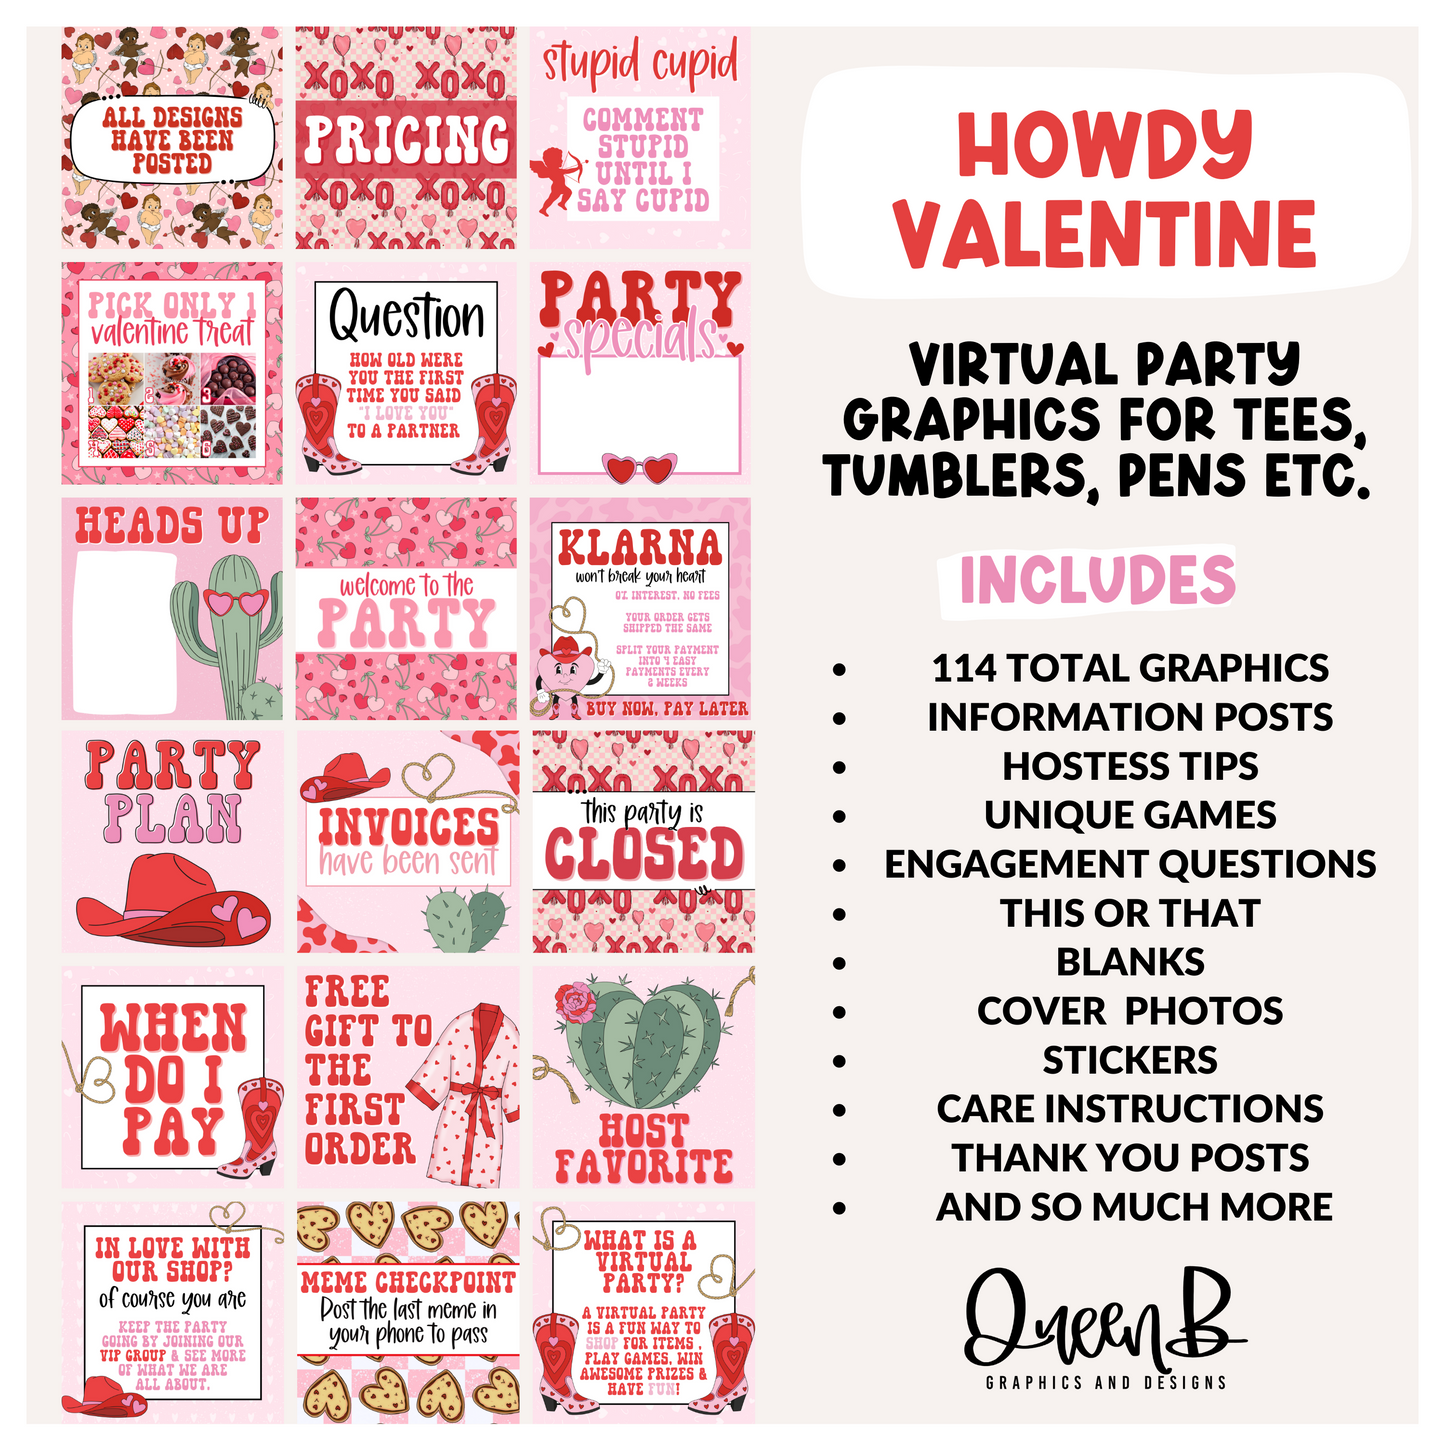 Howdy Valentine Tee Party & Virtual Party Graphics Collection